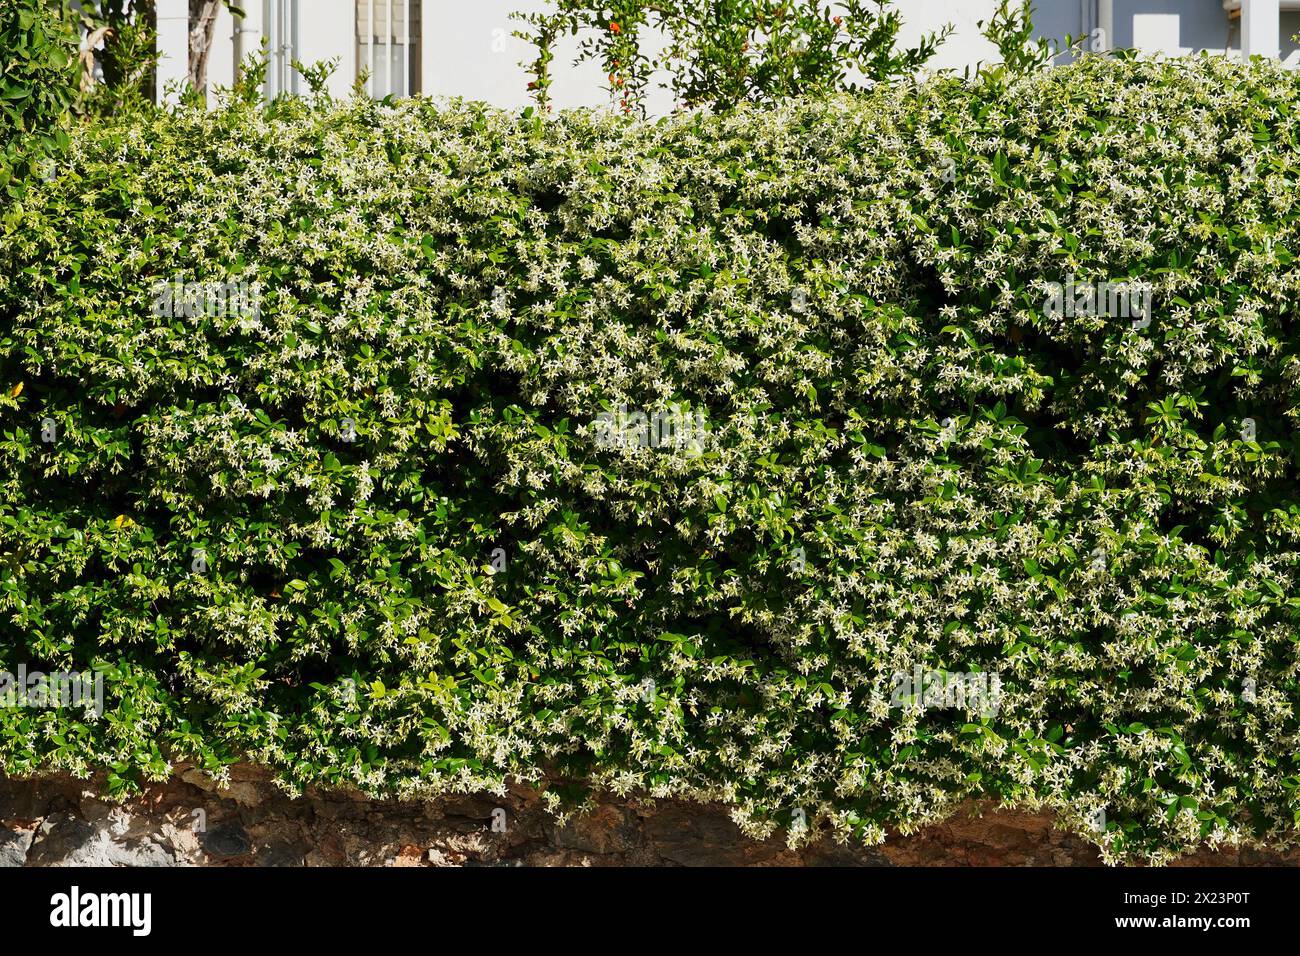 Southern or star jasmine, or Rhynchospermum jasminoides, in full bloom, covering a wall Stock Photo